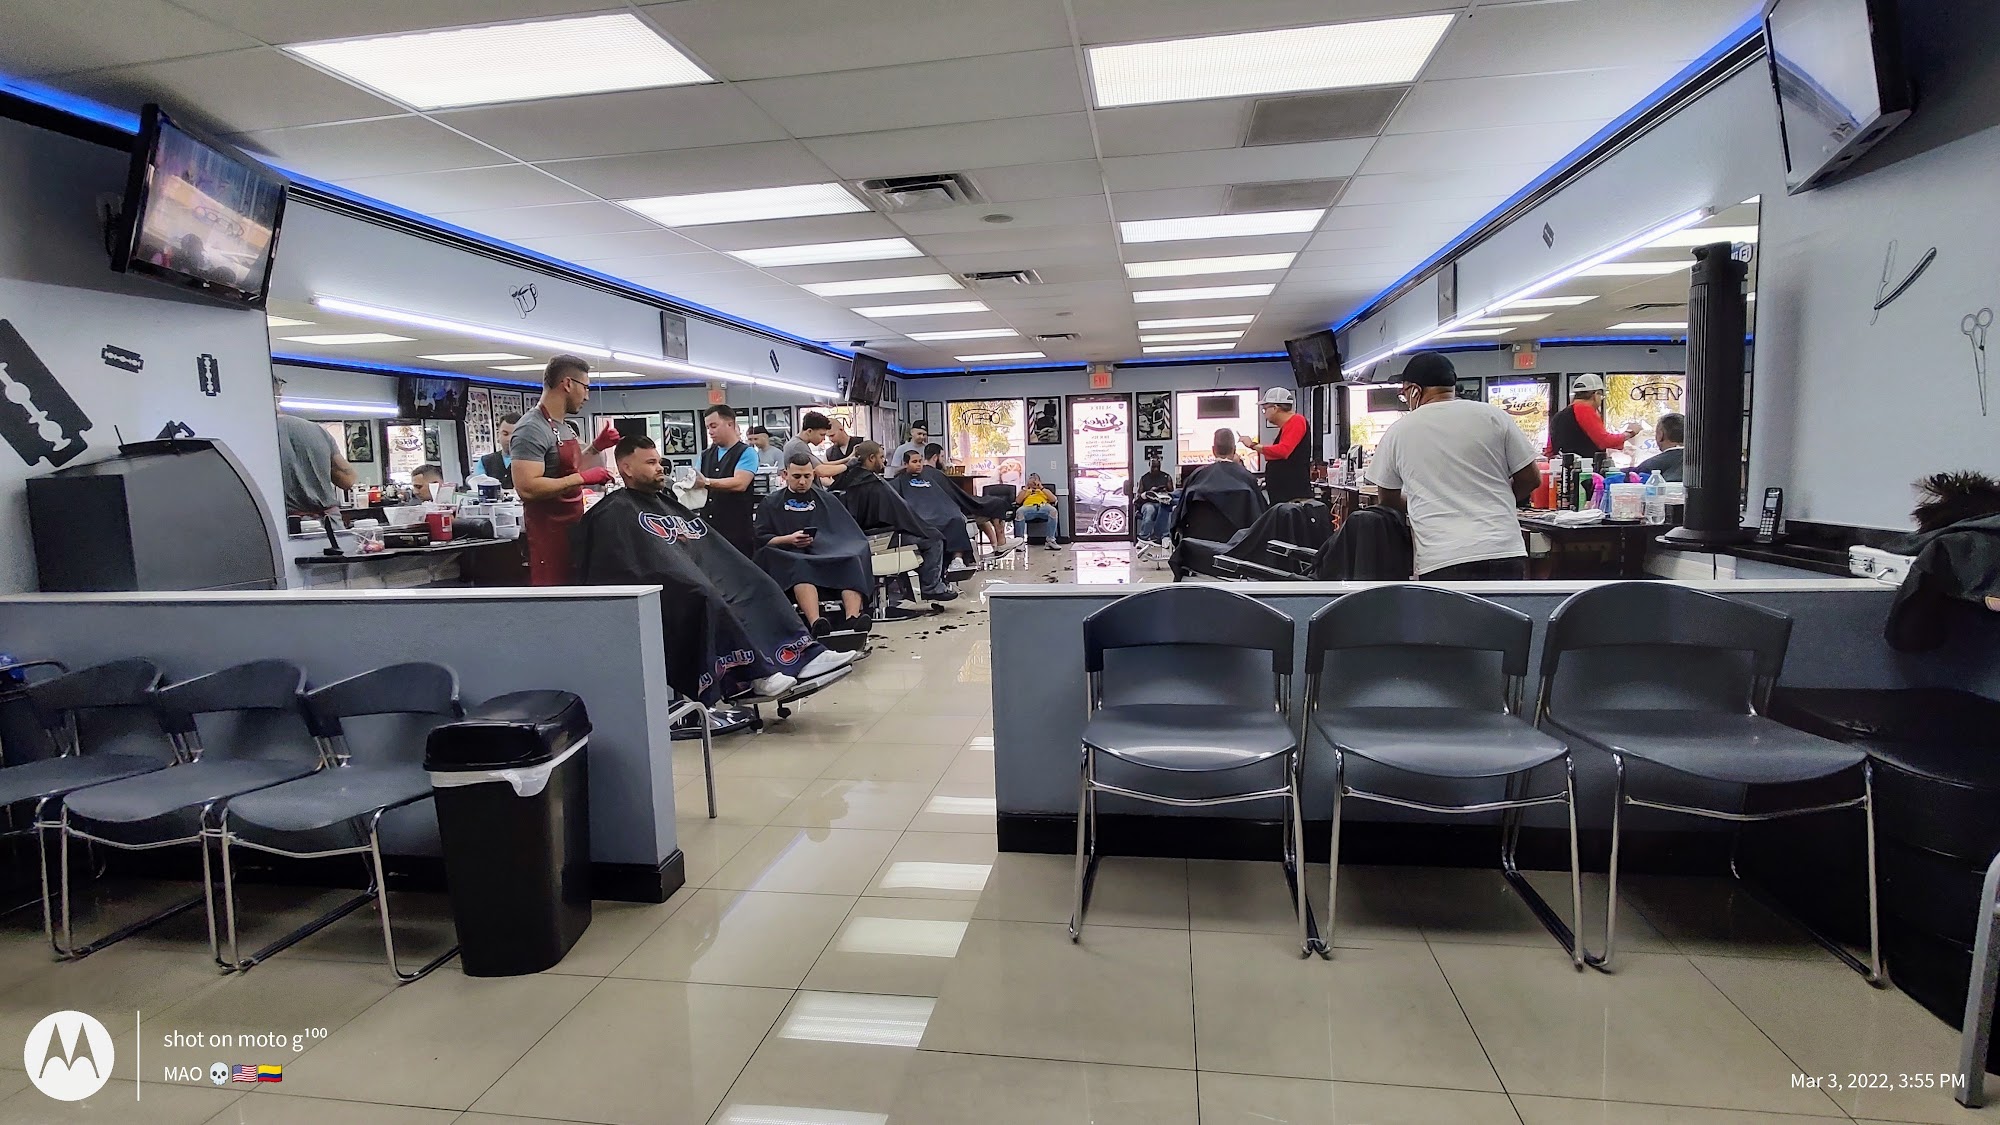 styles barber shop